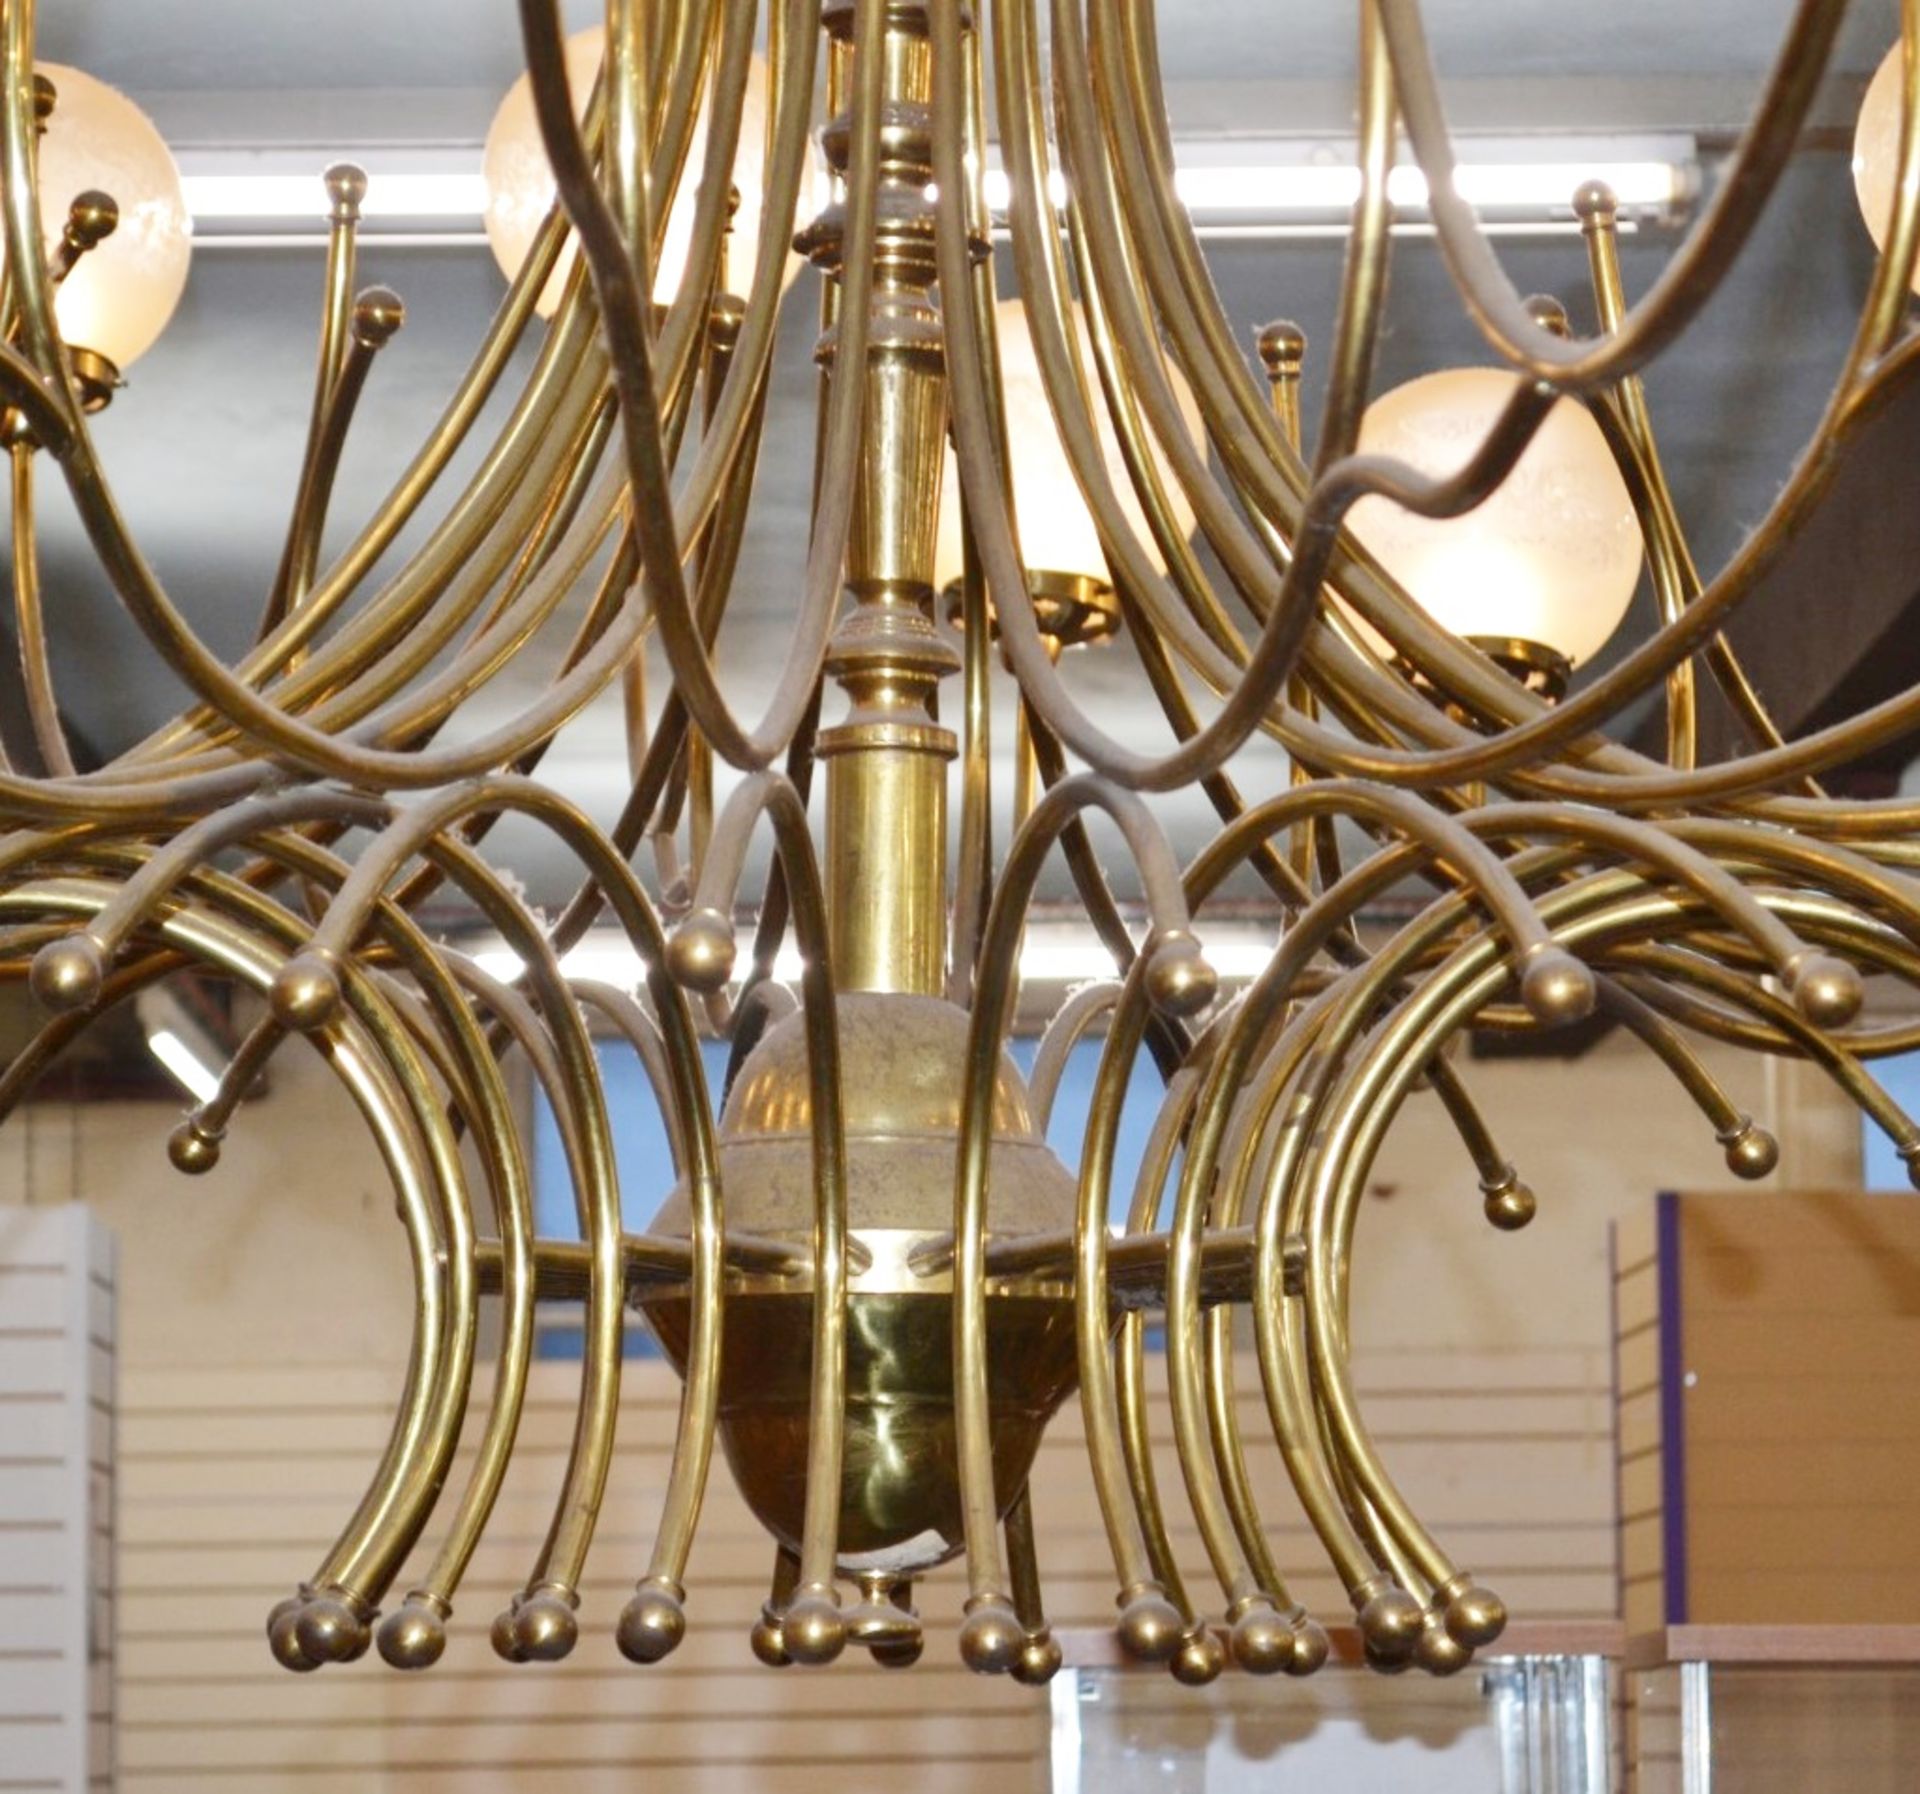 1 x Vintage 24 Light Brass Chandelier With Opaque Globe Shades - 261 cms Width - Ref BB000 - CL351 - - Image 3 of 7